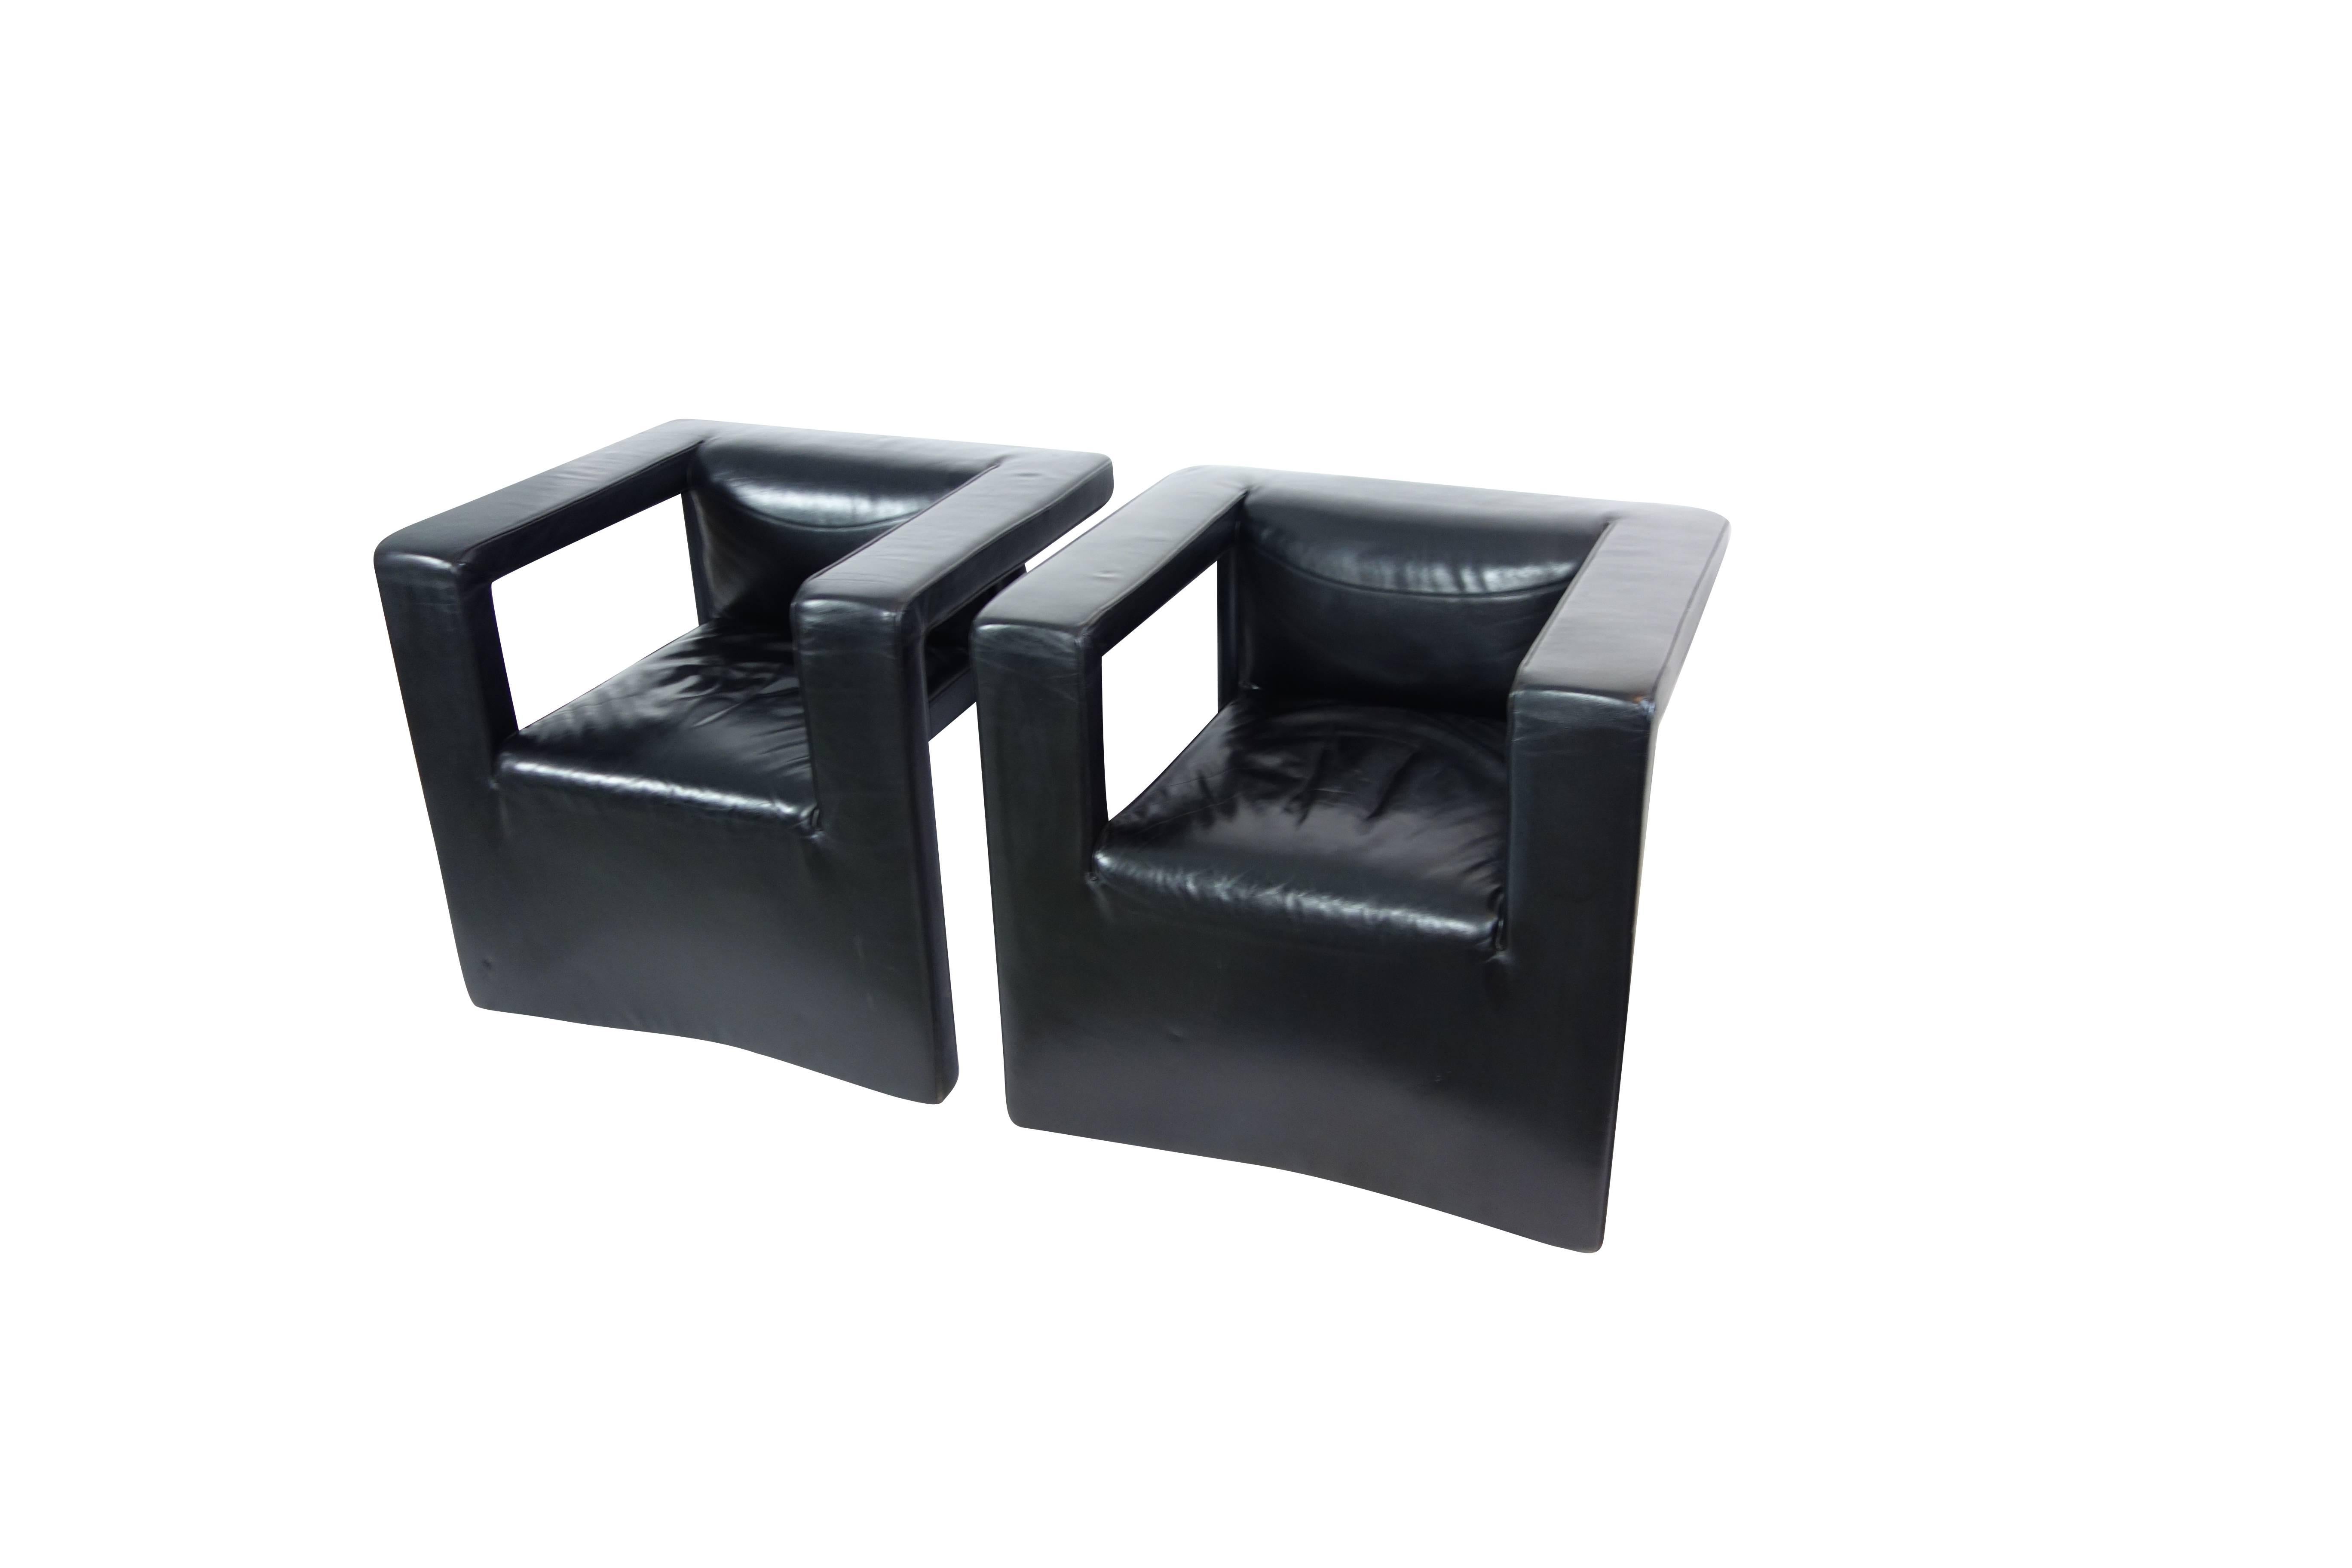 This is a sleek black leather De Sede lounge chair from Switzerland, circa 1980. The circular steel rear legs and arm rests that continue to the floor make this very unique in design.

This listing is for a single (1) chair.